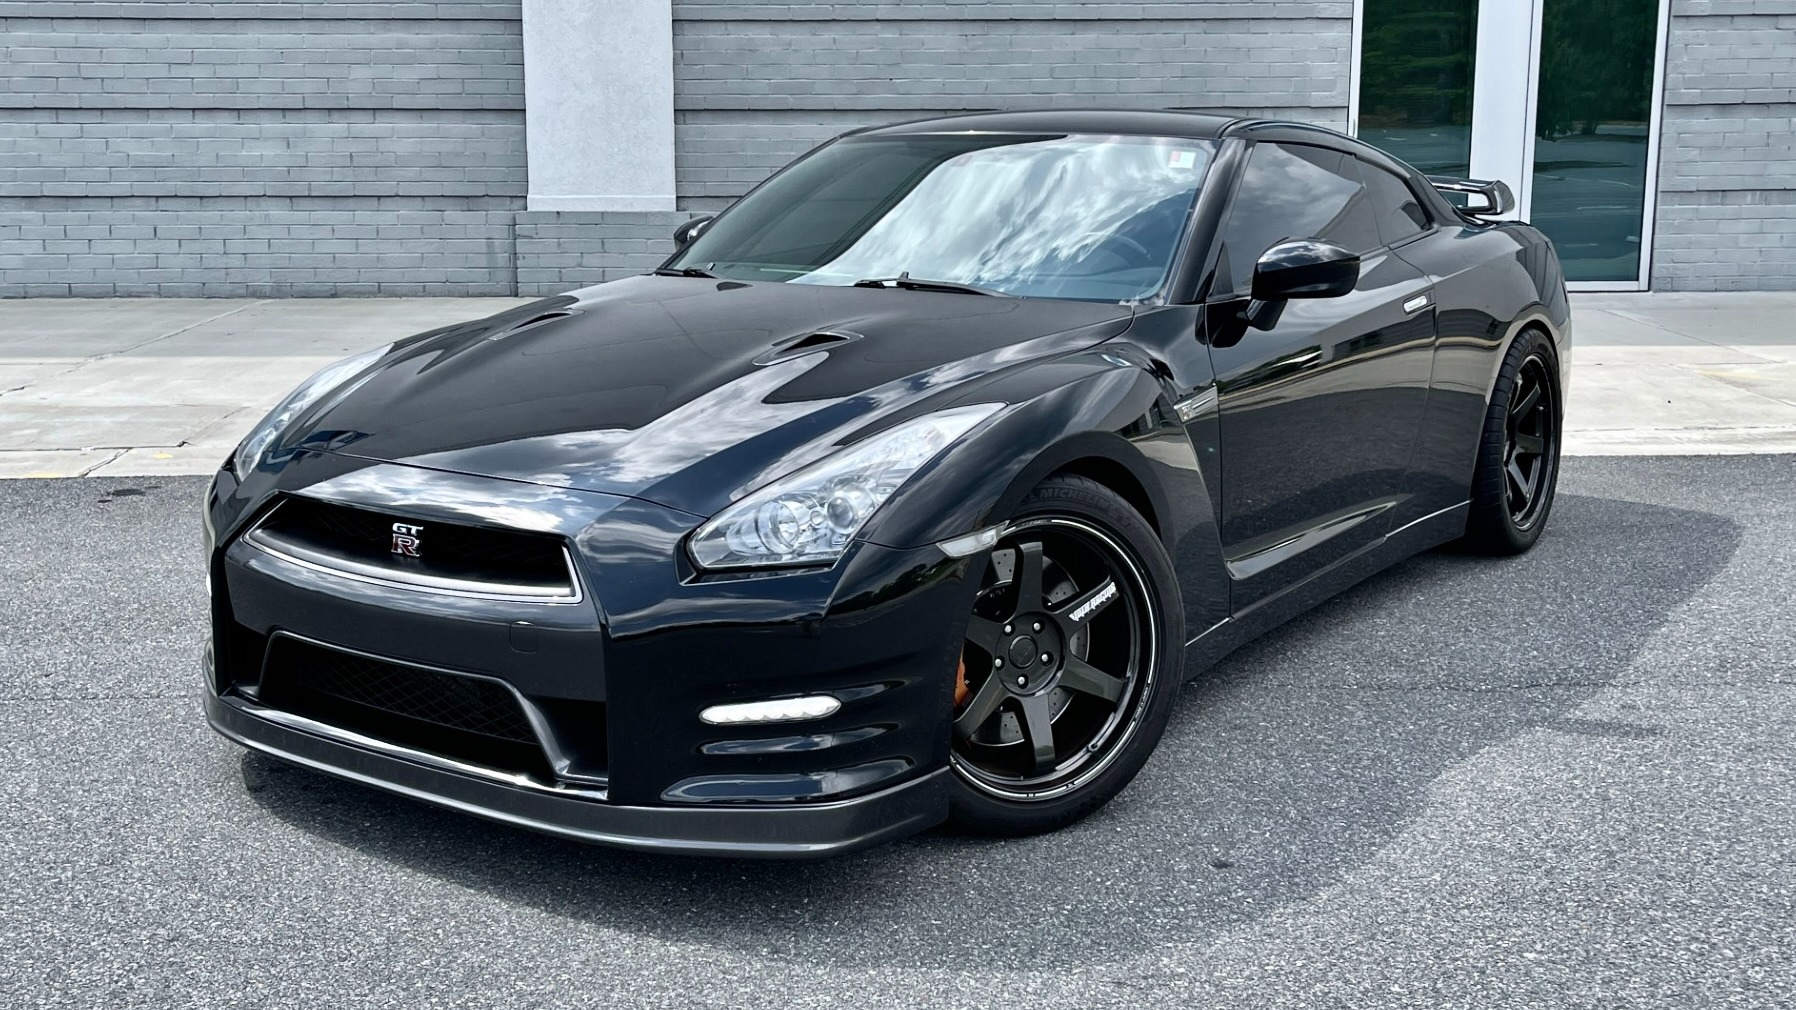 Used 2013 Nissan GT-R PREMIUM COUPE / 3.8L TWIN-TURBO / 6-SPD AUTO / COLD WTHR PKG / CAMERA for sale Sold at Formula Imports in Charlotte NC 28227 1